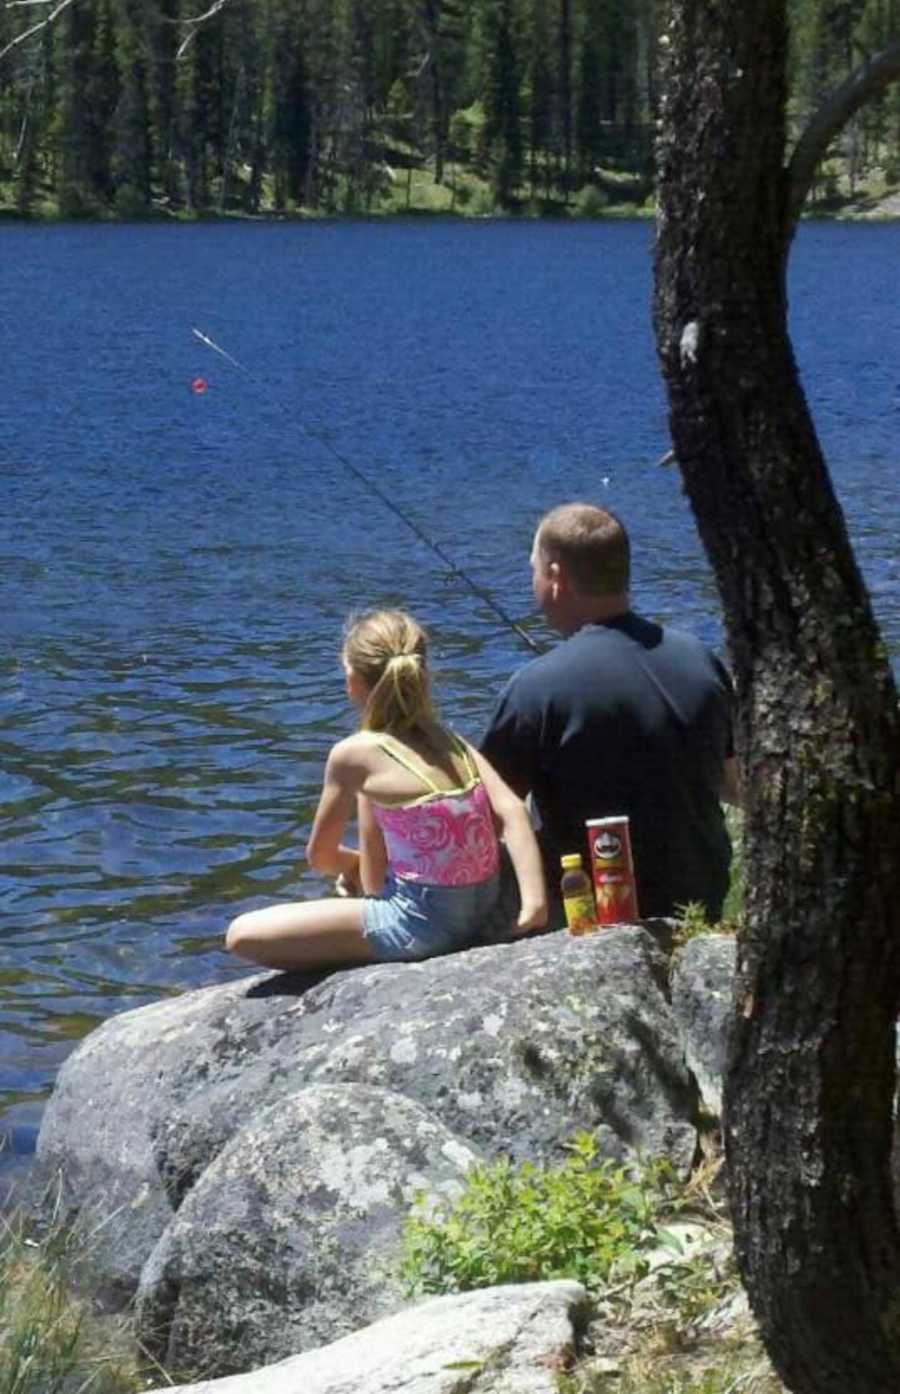 Man who died from pancreatic cancer sits fishing on rock with daughter by his side